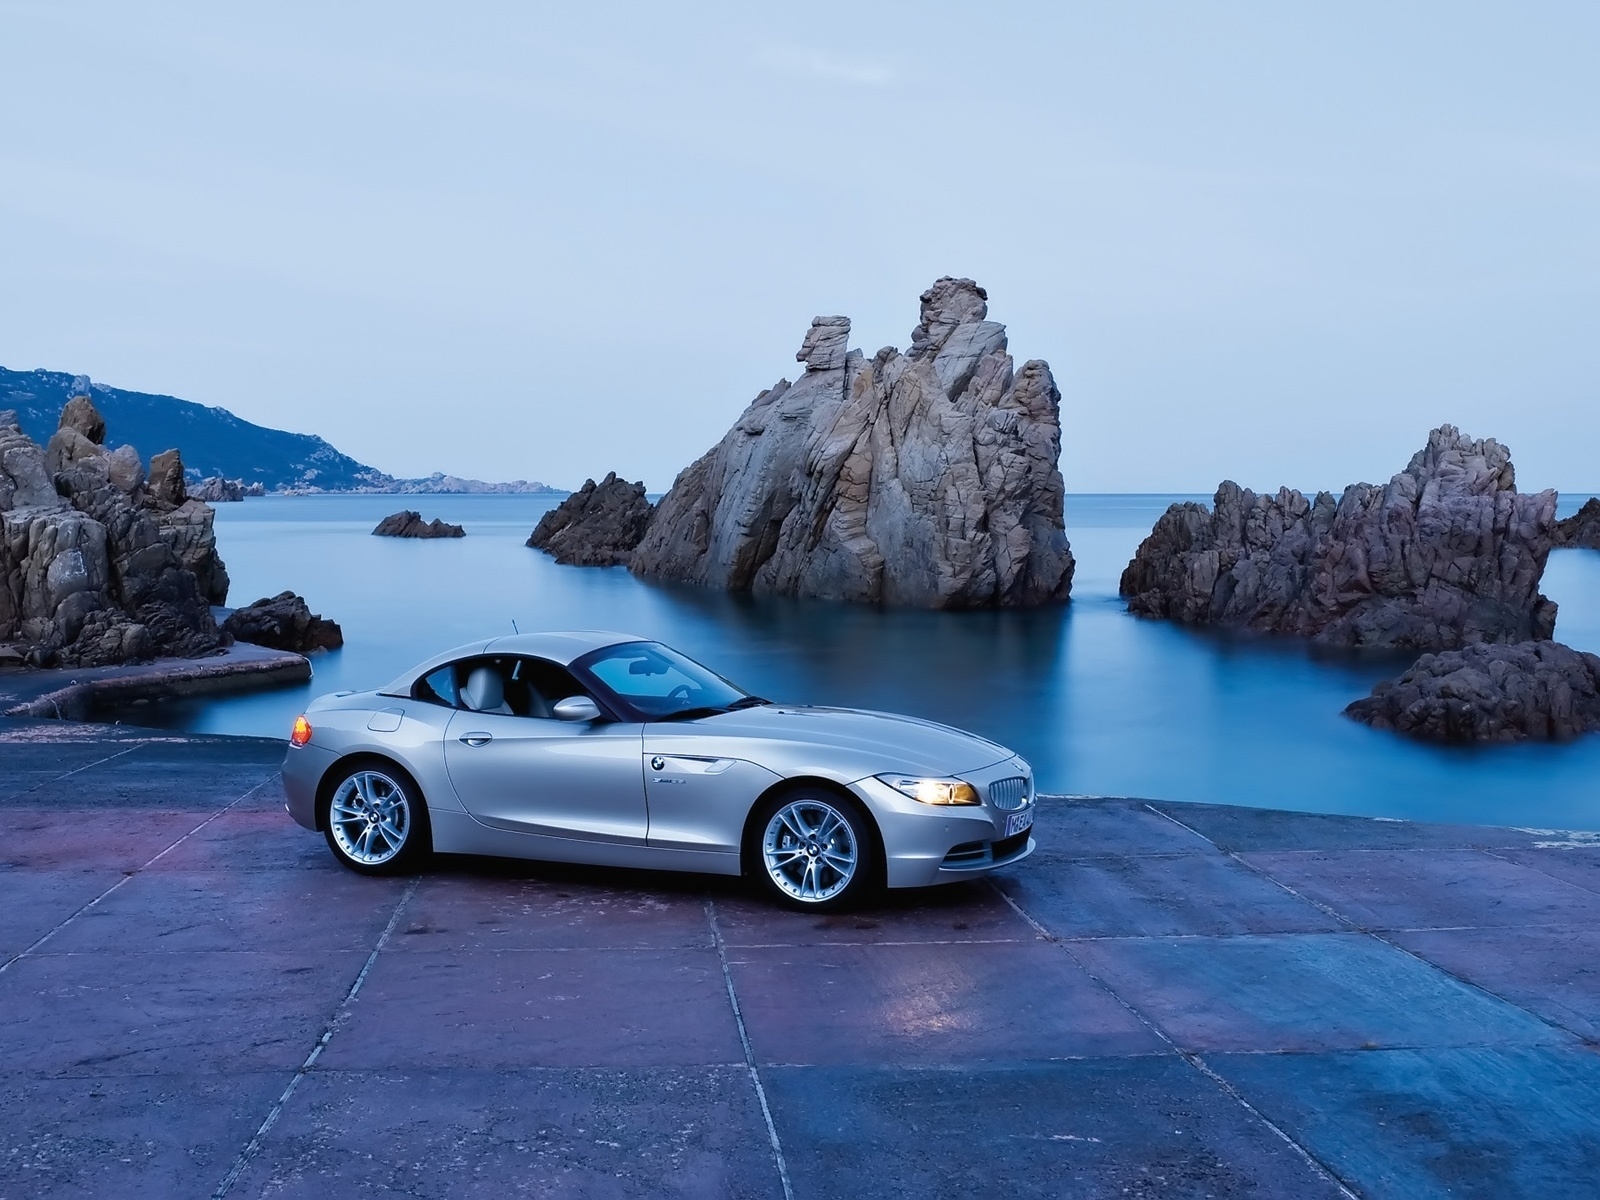 BMW Z4 Roadster Seashore 2009 for 1600 x 1200 resolution